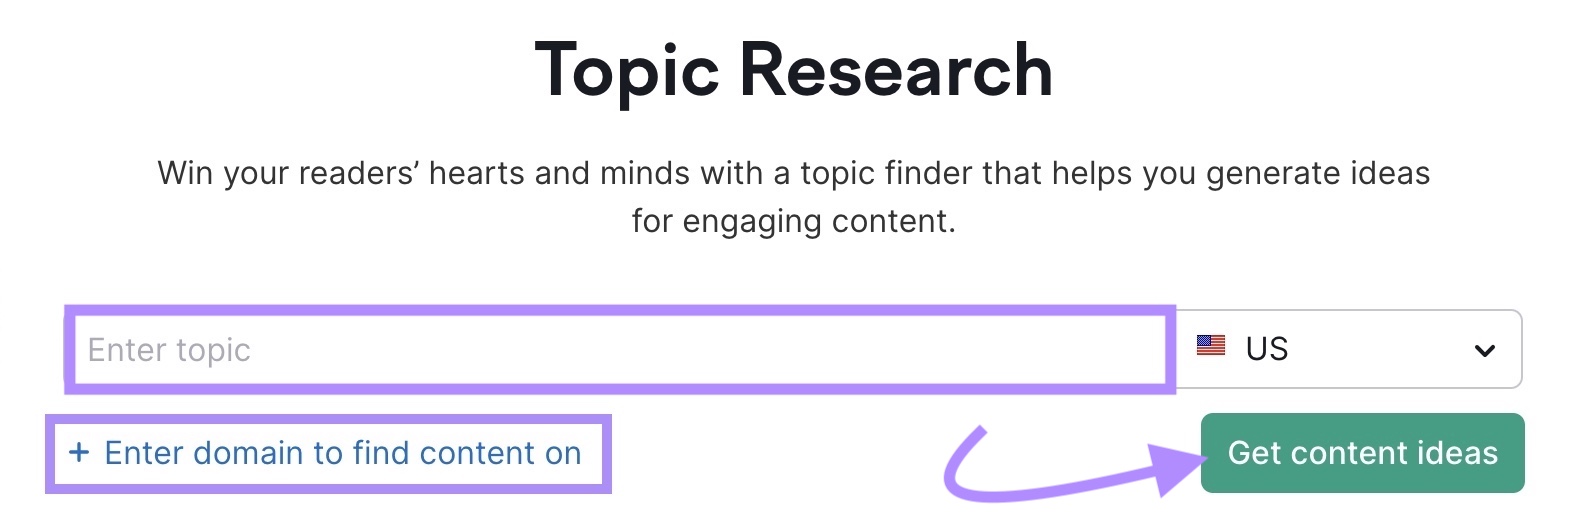 Topic Research tool